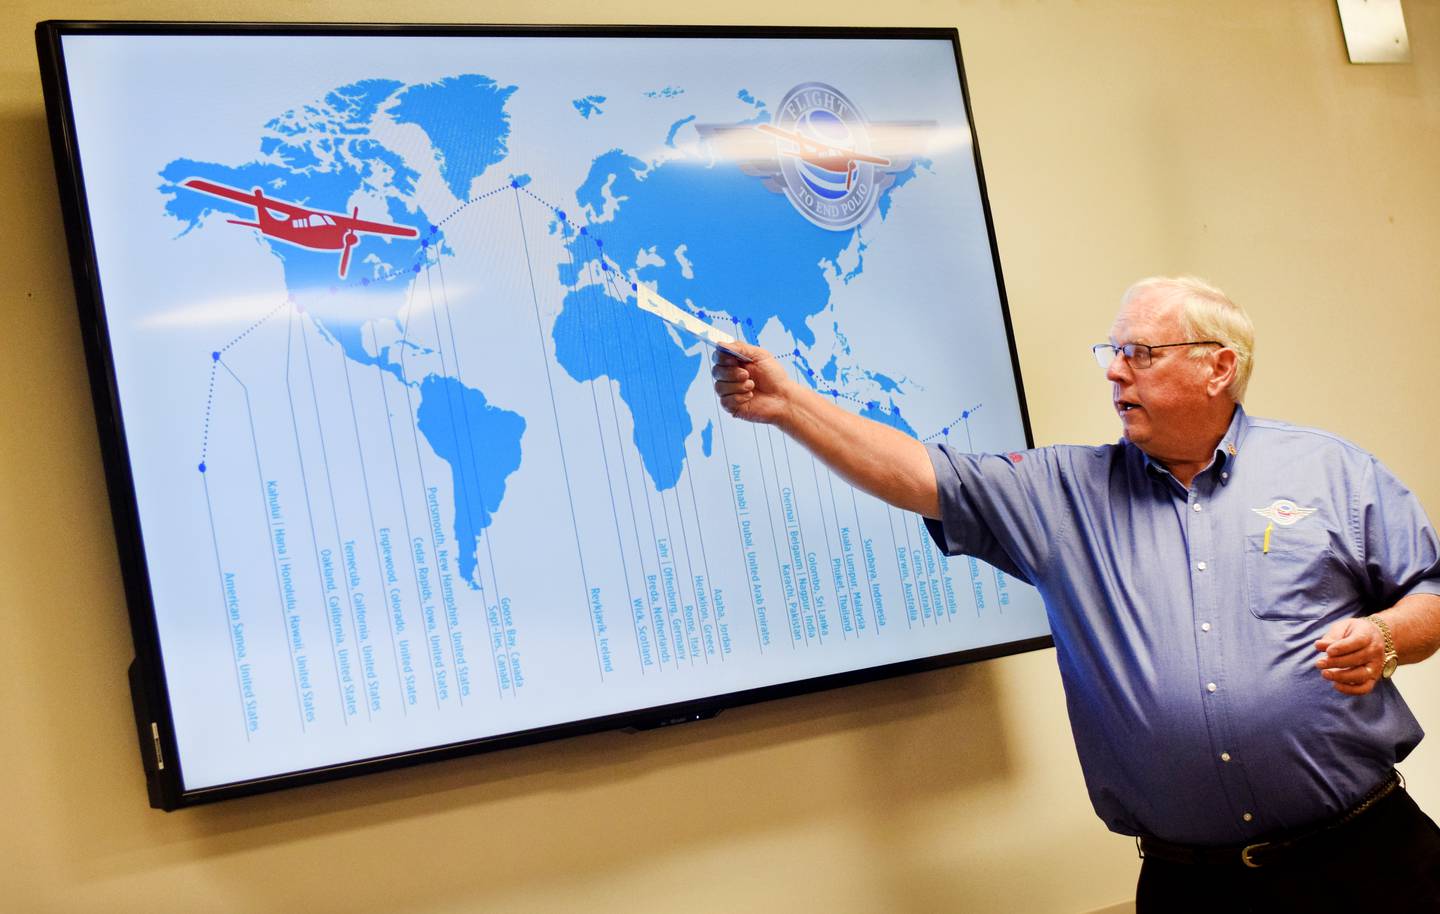 John Ockenfels, a member of the International Fellowship of Flying Rotarians and one of two pilots who flew around the world this summer in a single-engine airplane spreading awareness about polio eradication, shows the flight plan during a presentation Sept. 19 at the Newton Rotary Club's meeting at DMACC Newton Campus.